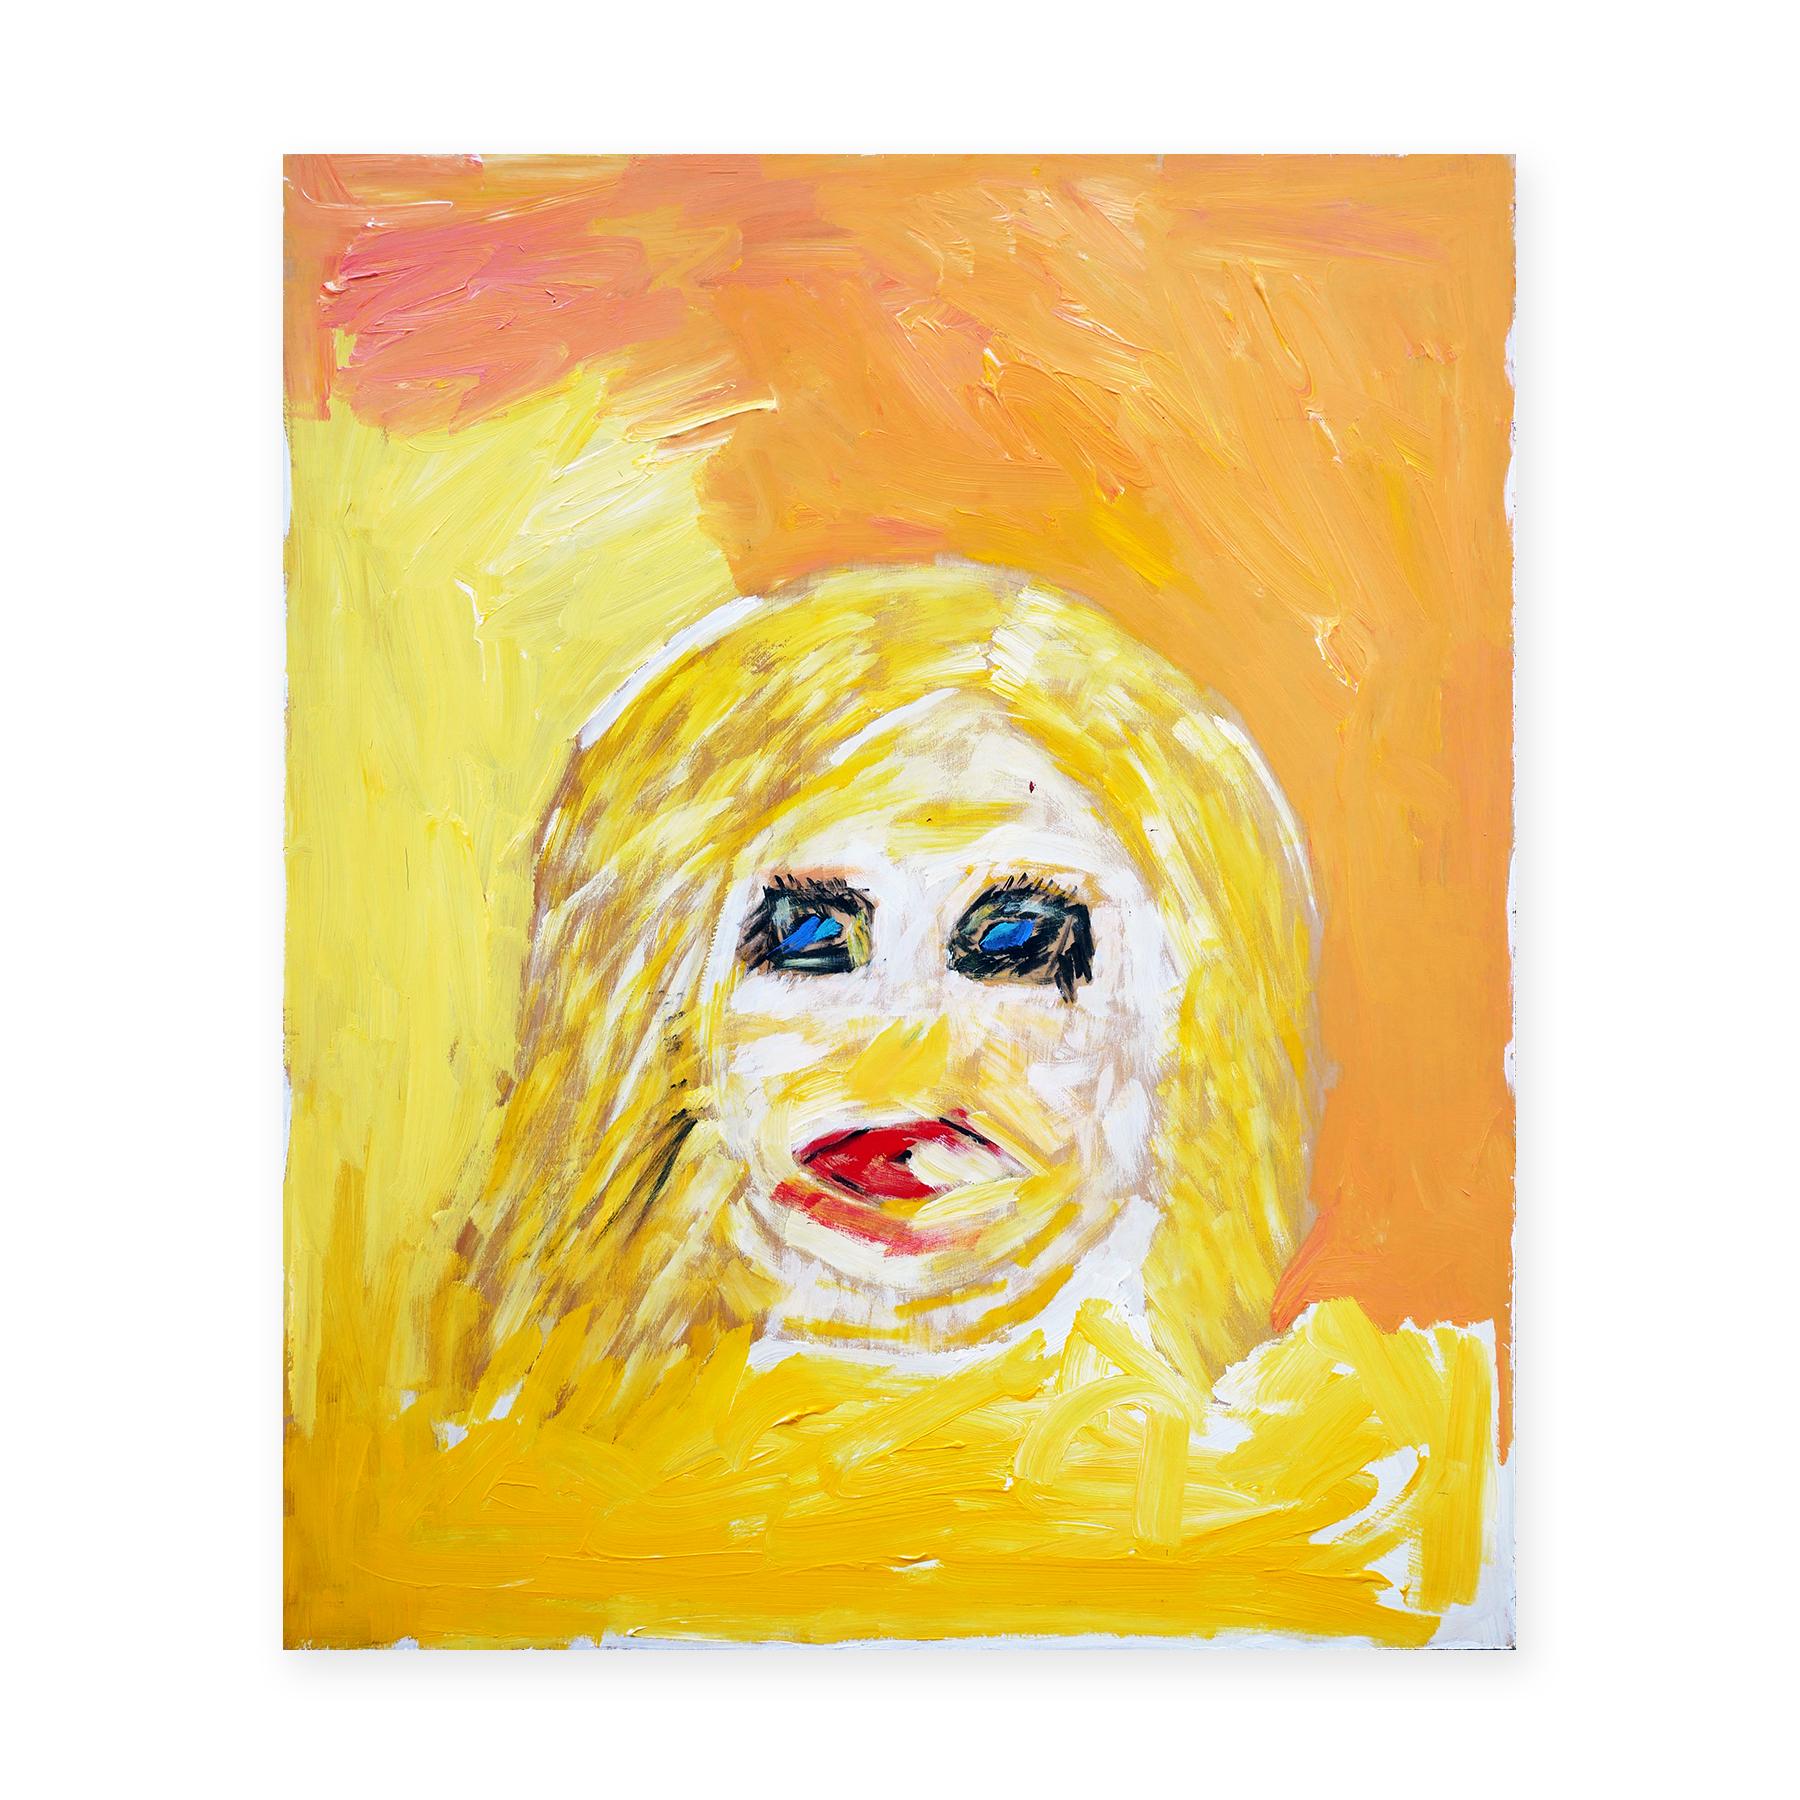 Orange and Yellow-Toned Abstract Figurative Portrait of a Blonde Woman 2